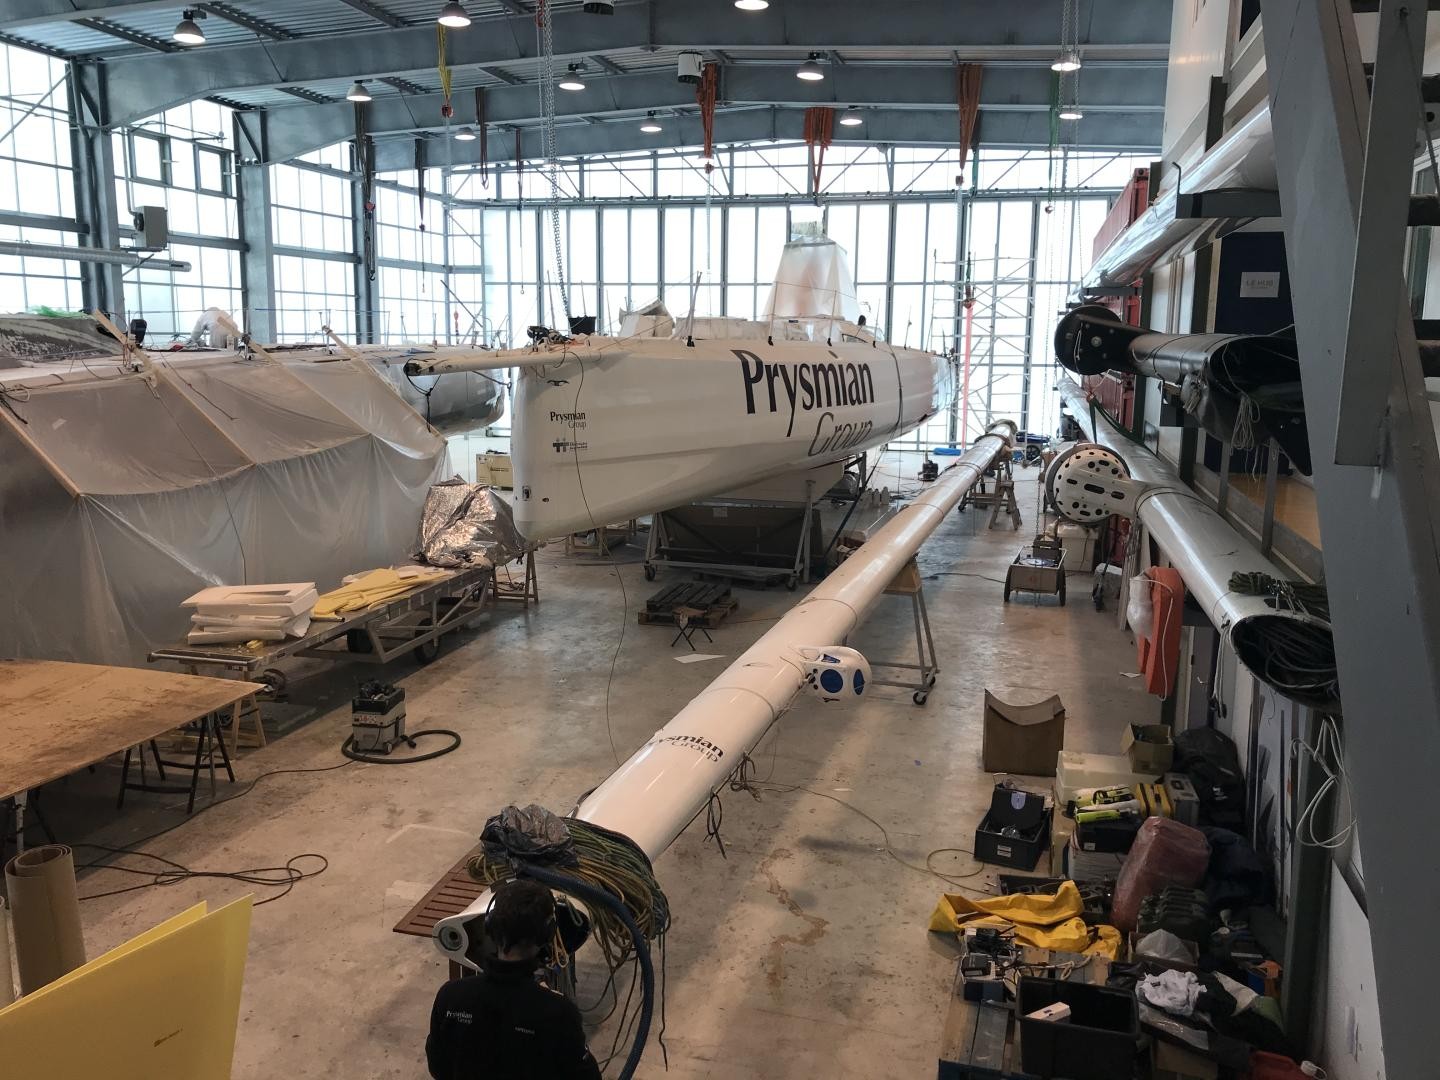 L'Imoca Prysmian Group in cantiere - Photo Noesis